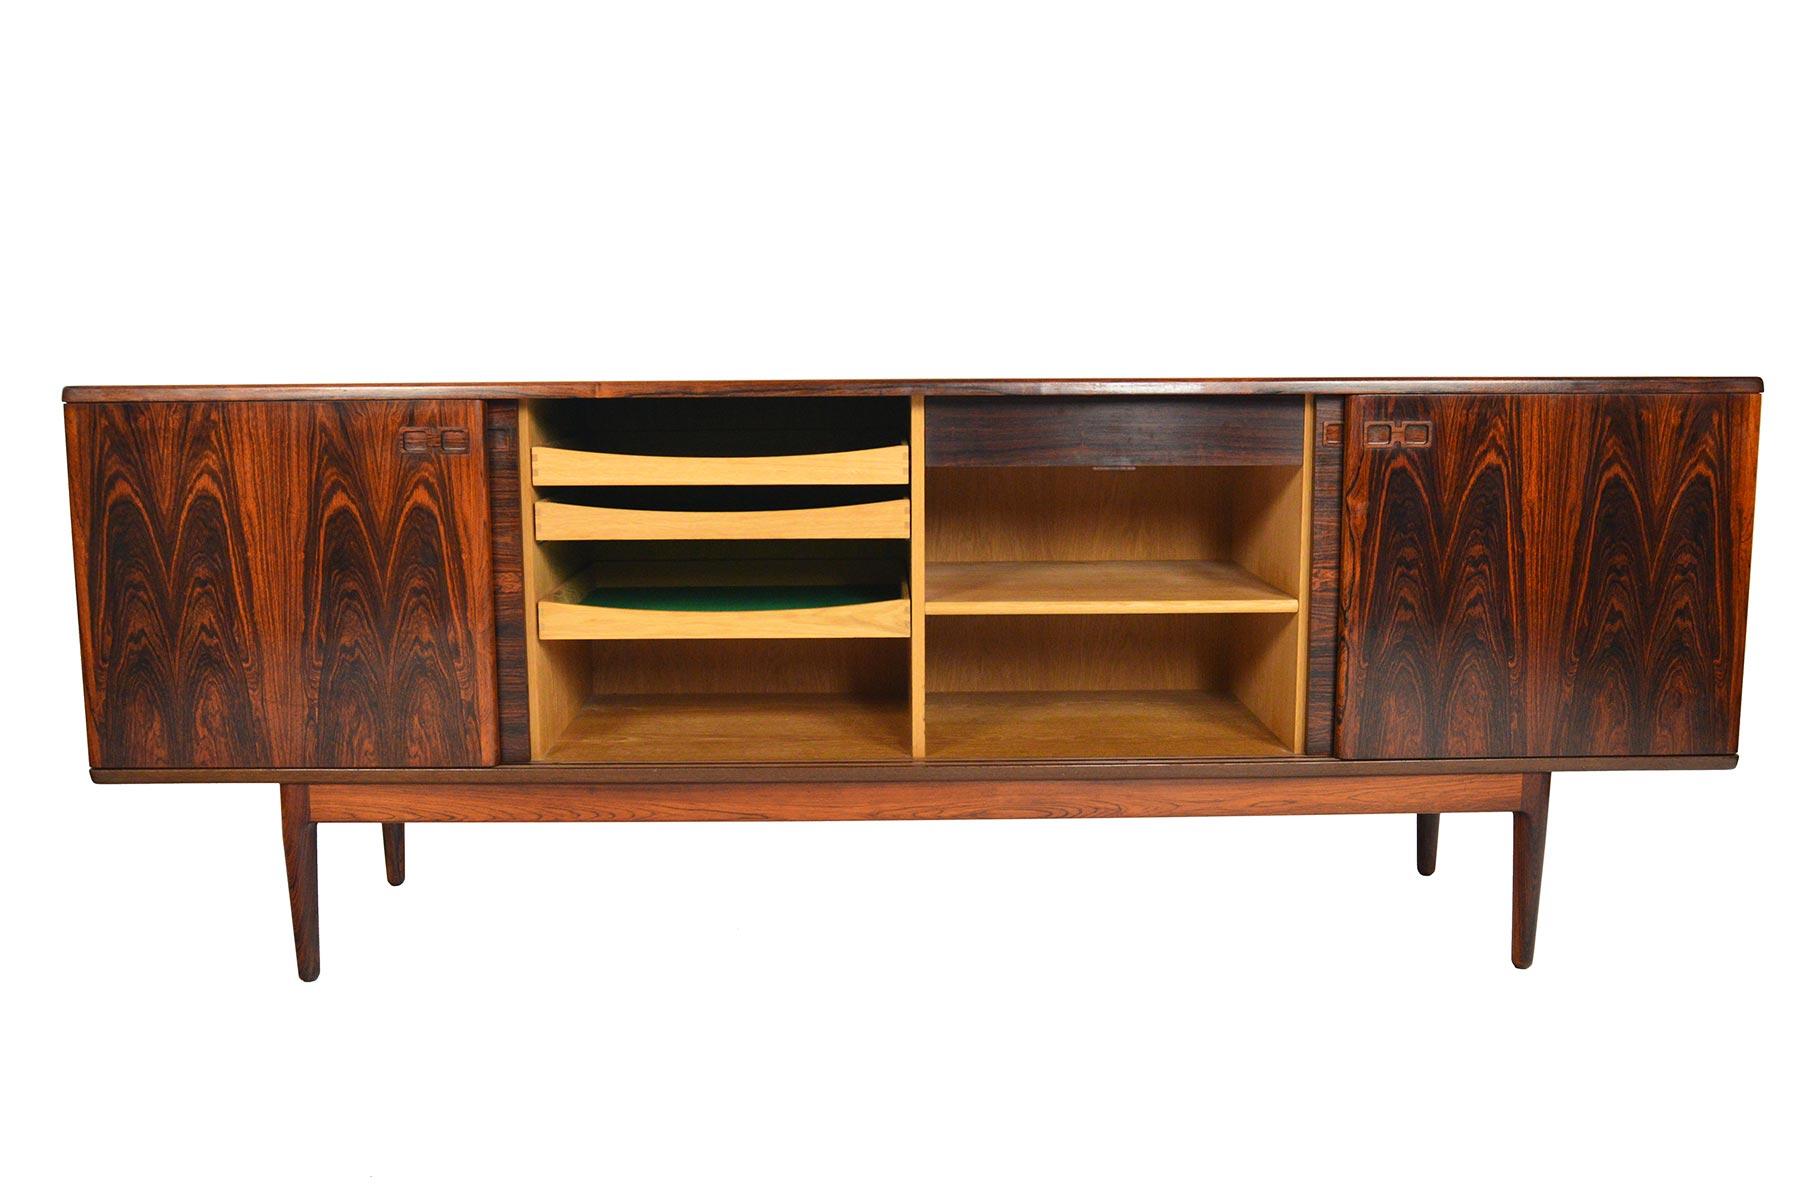 This large sliding door credenza offers a simple design highlighted by hand- selected cuts of Brazilian rosewood. Each pair of doors offers a different orientation of book- matched wood grain and showcases cathedral patterns. Doors are adorned with